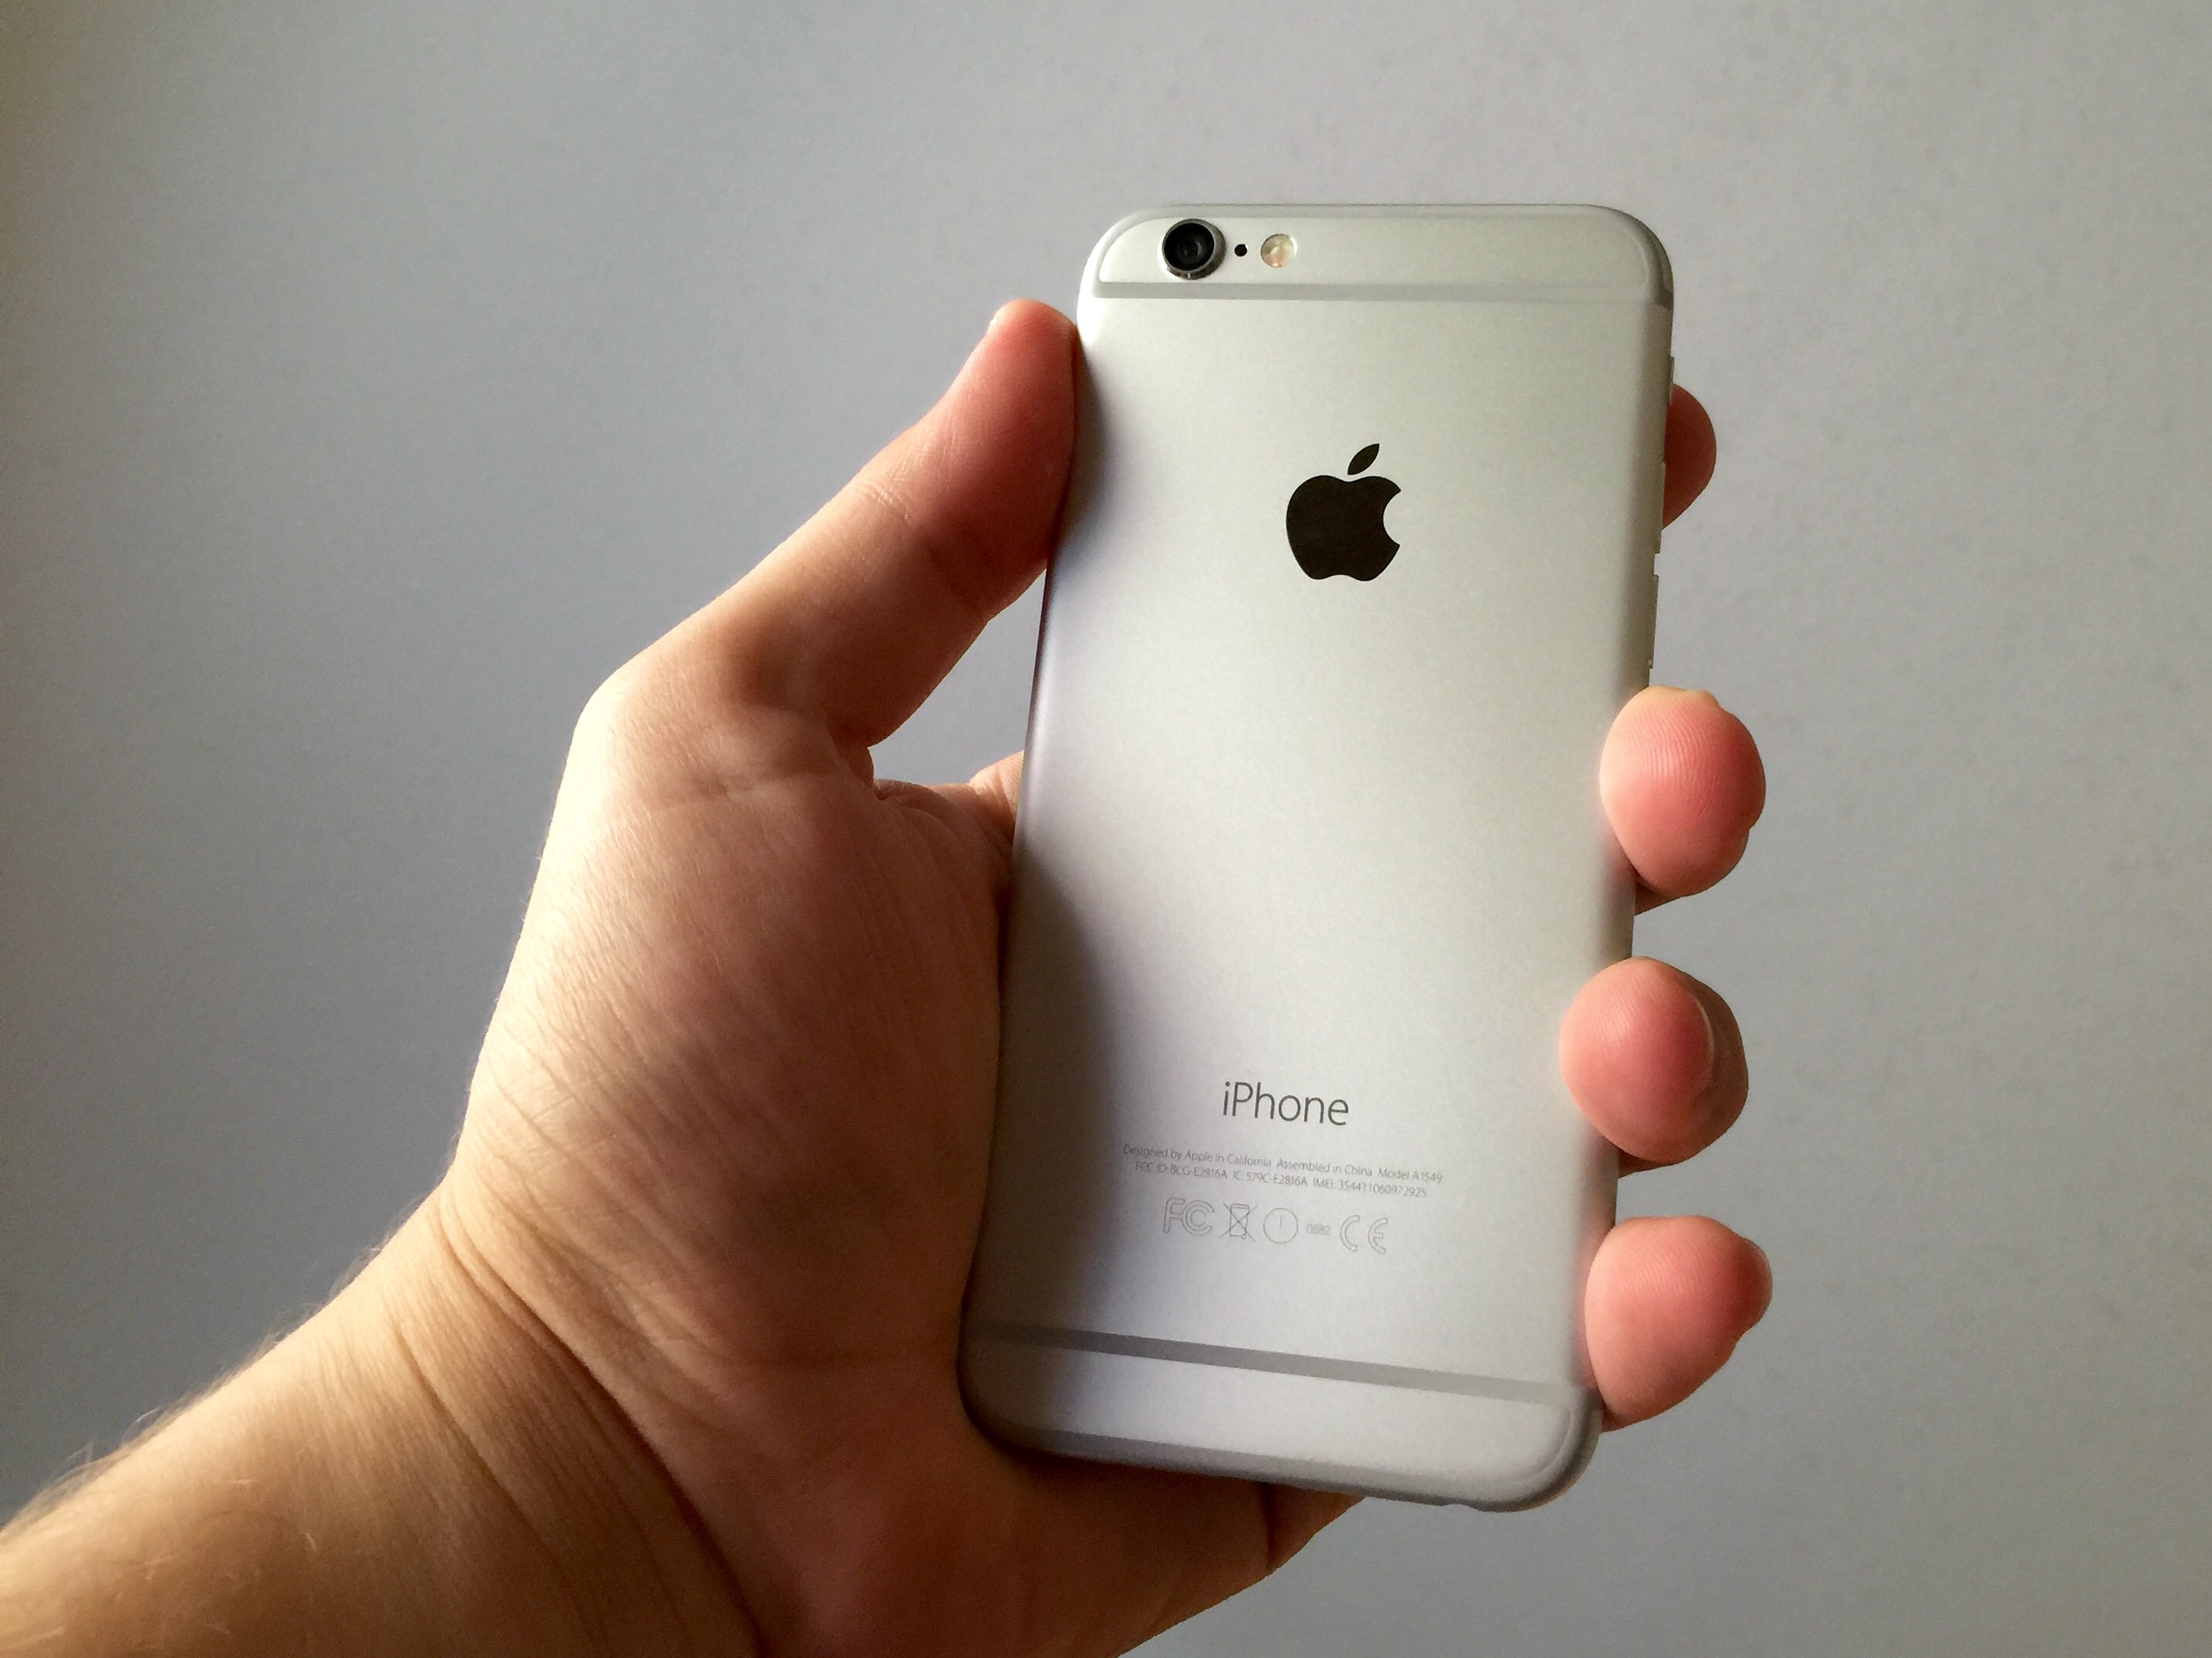 Our iPhone 6 first impressions reveal five things you'll want to know.